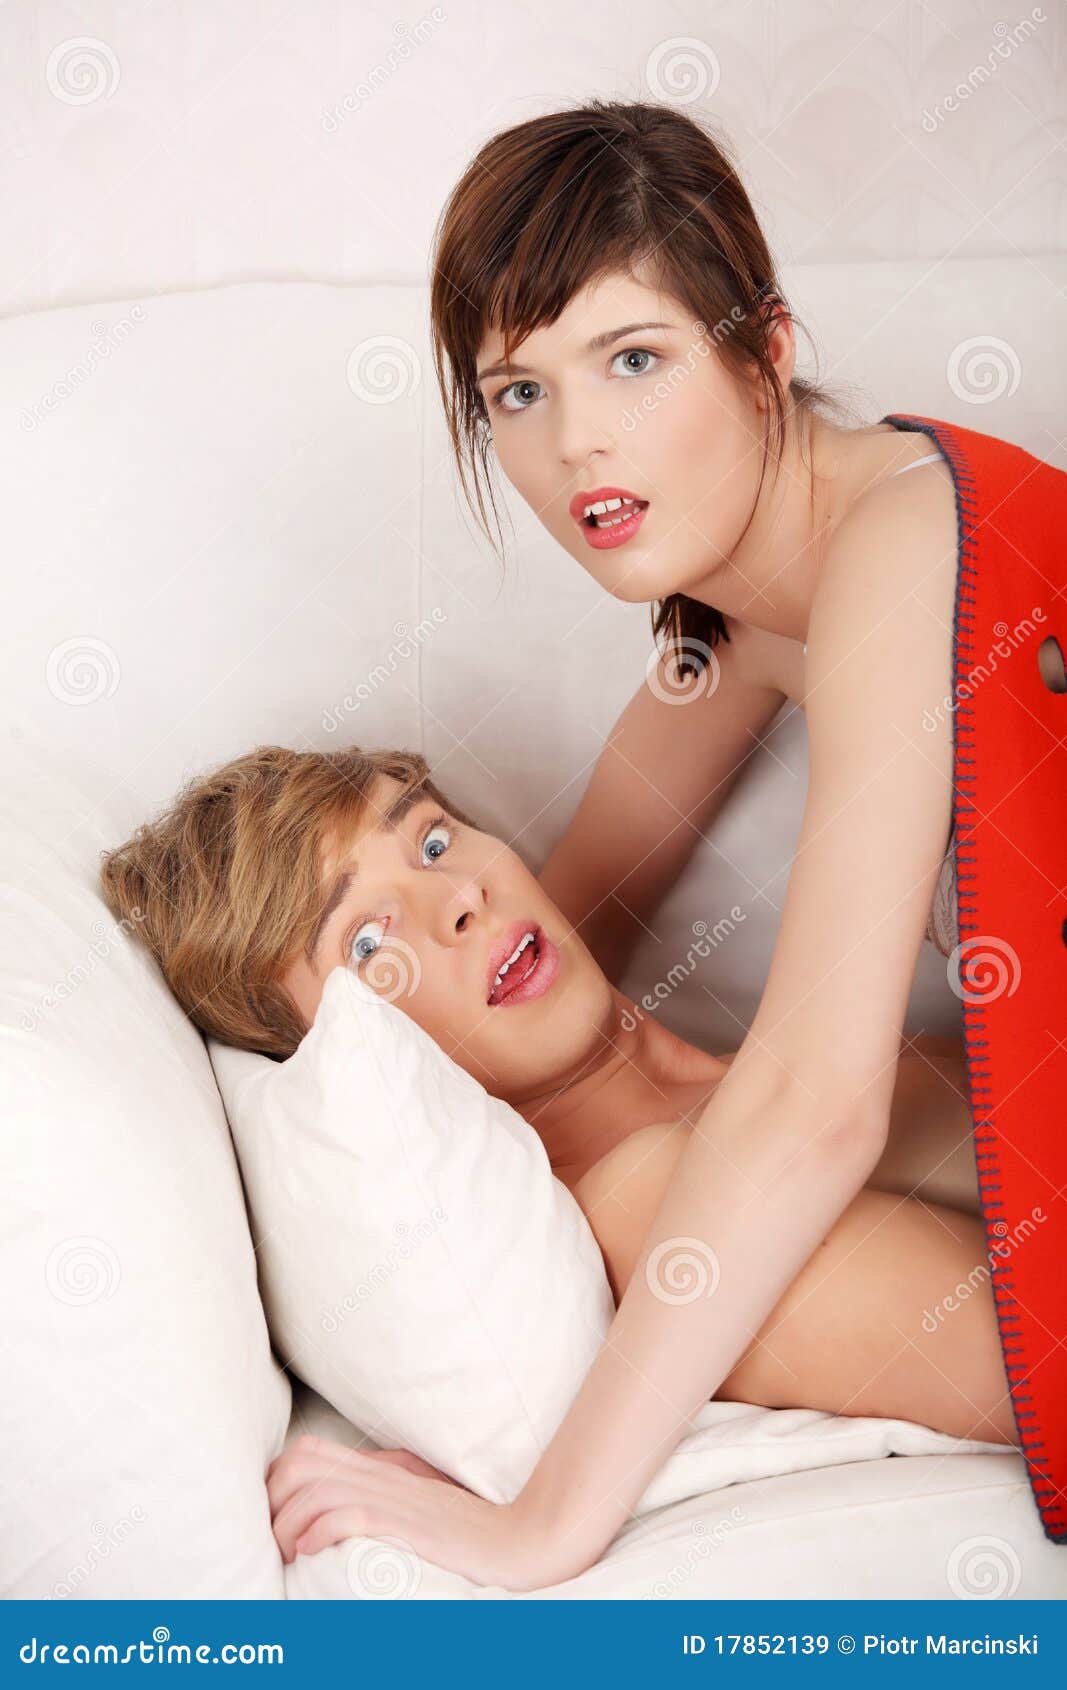 wife caught in bed the couple